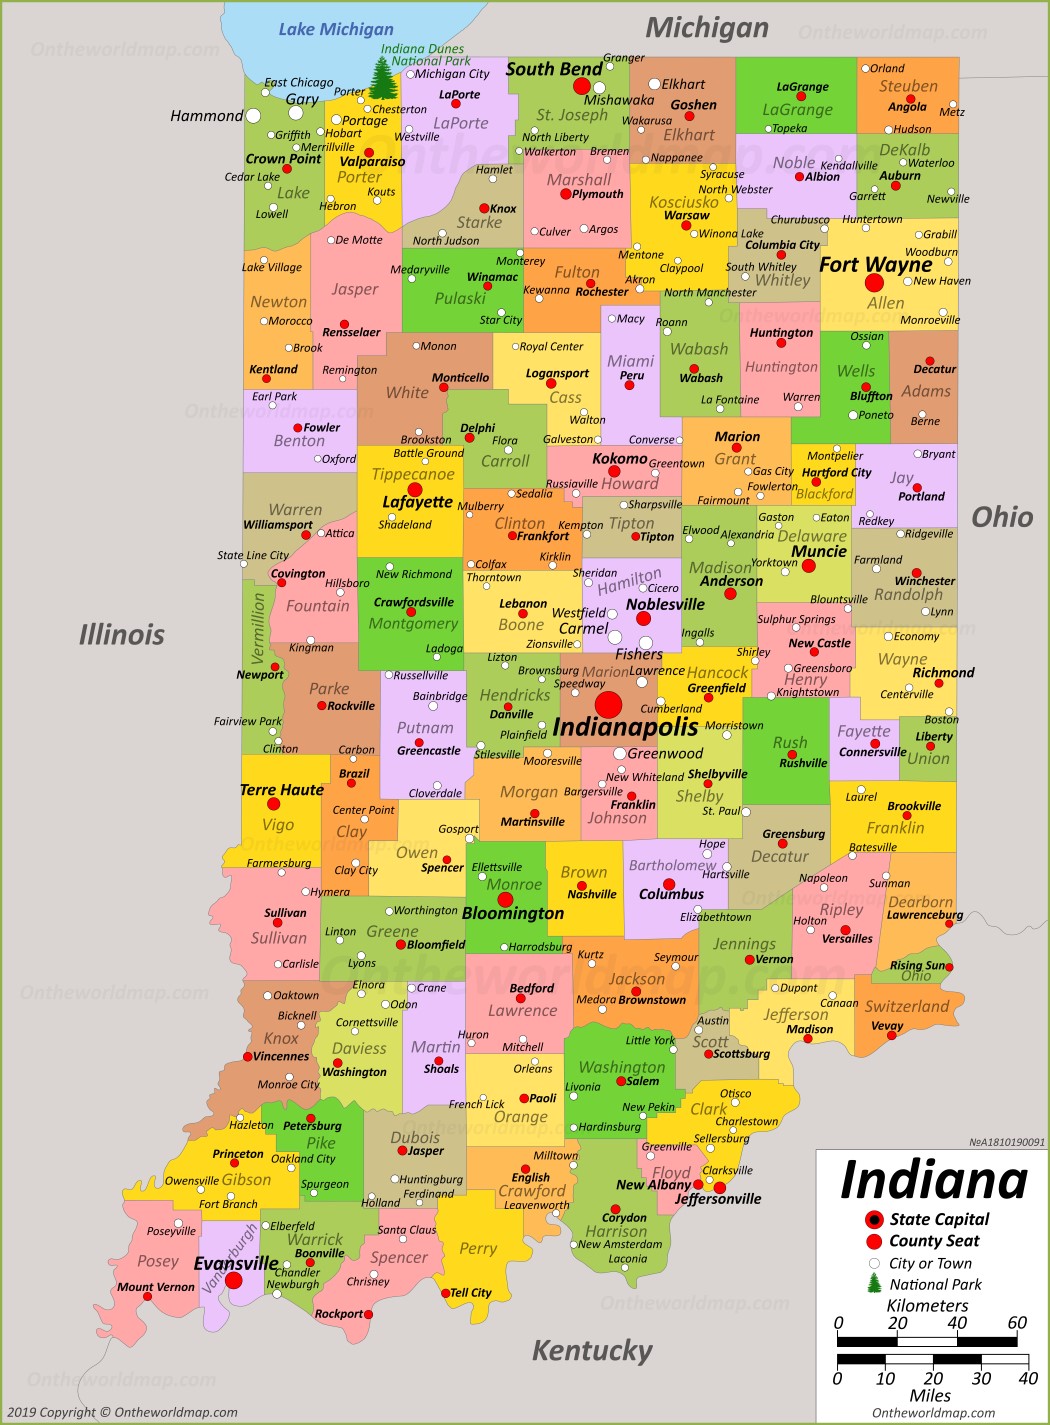 Indiana State Map | USA | Maps of Indiana (IN)